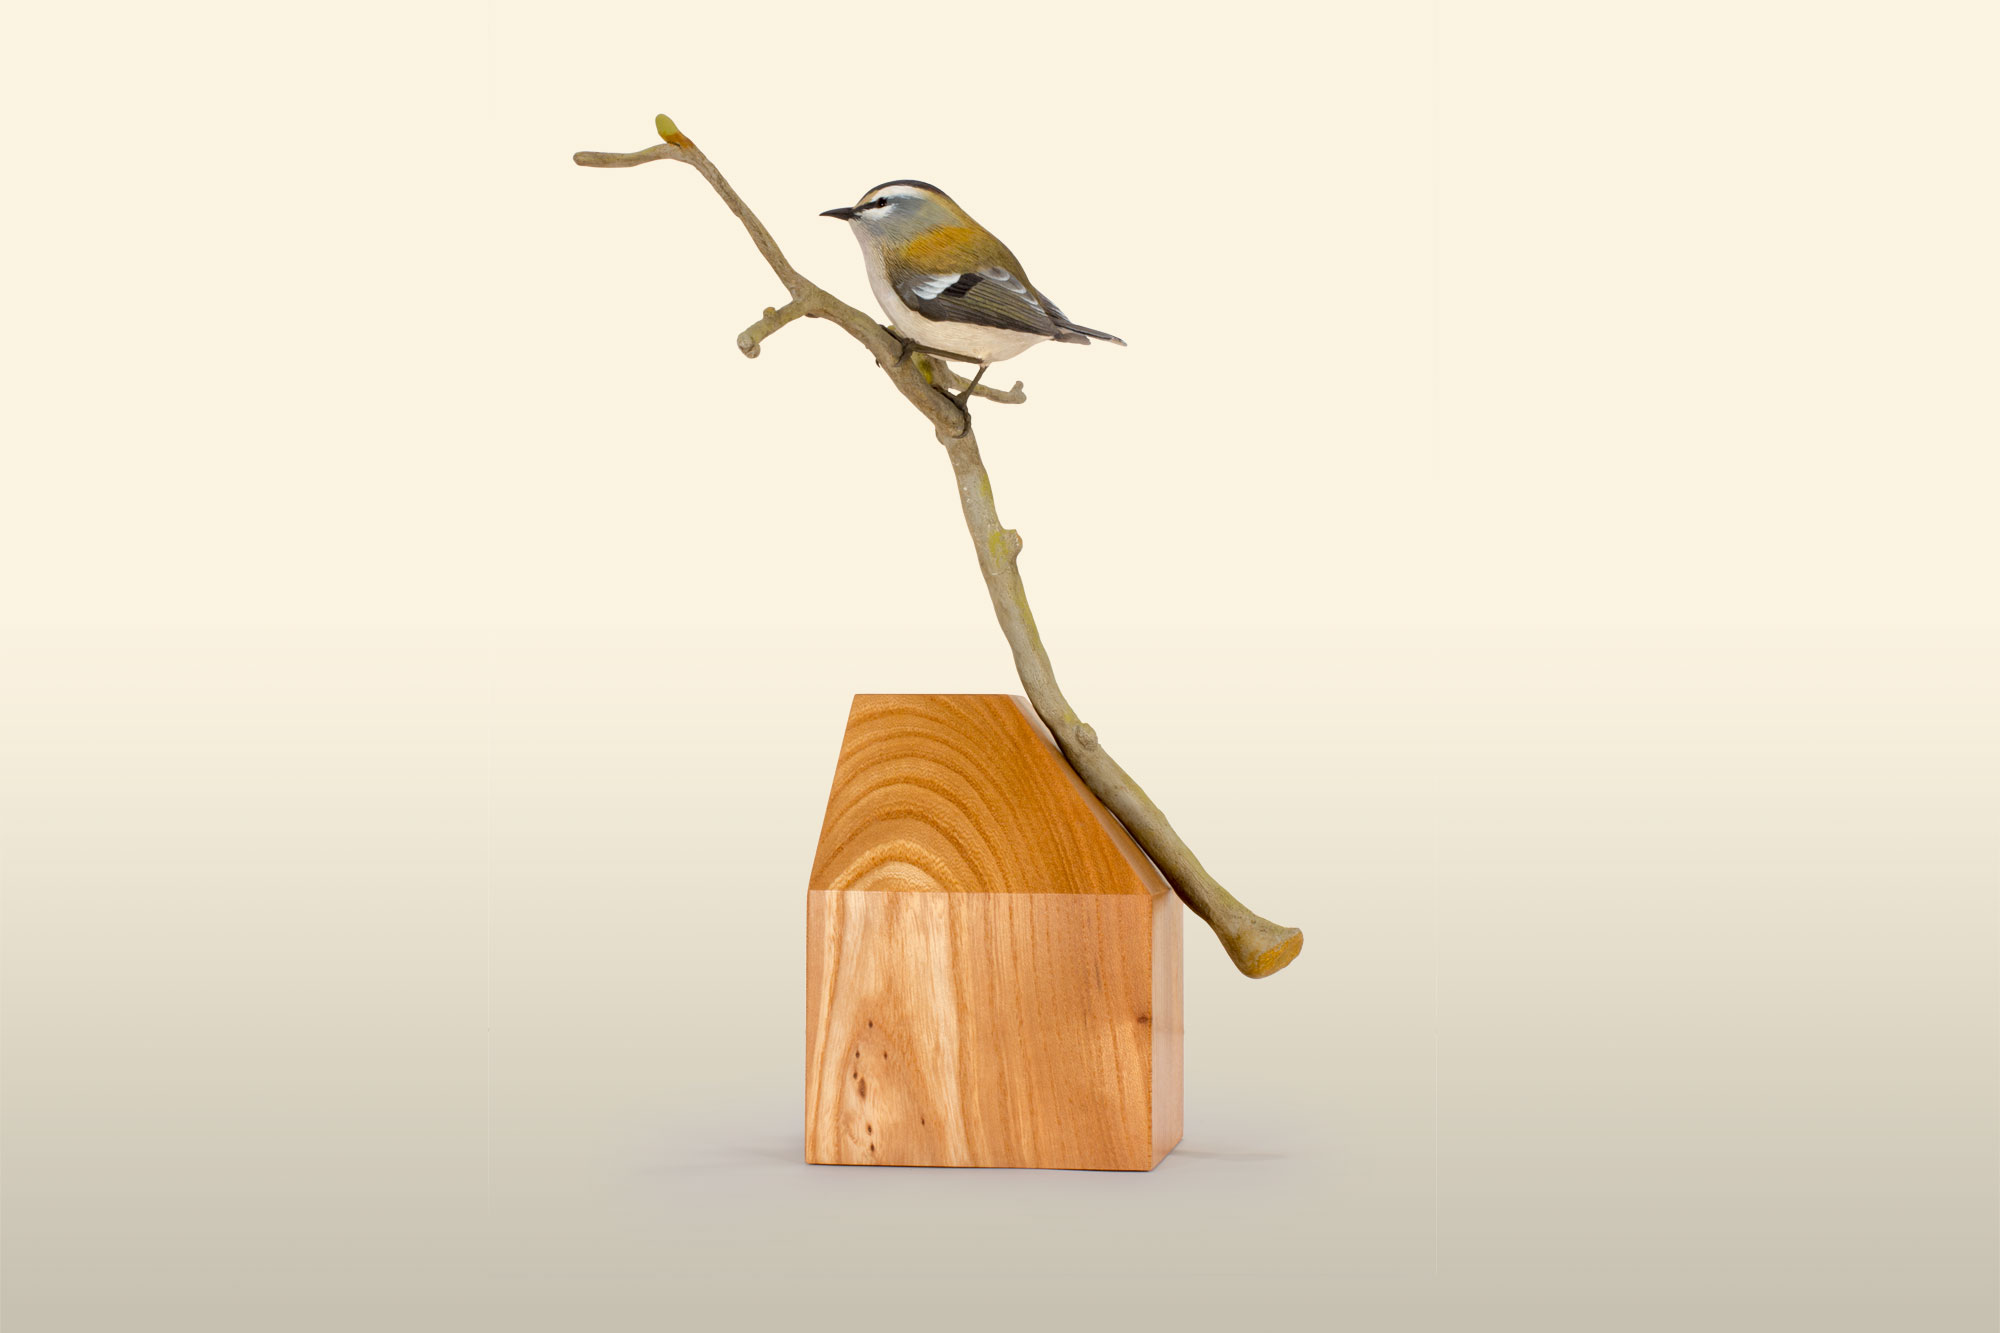 Firecrest bird wood carving by Feathercarver David Patrick-Brown